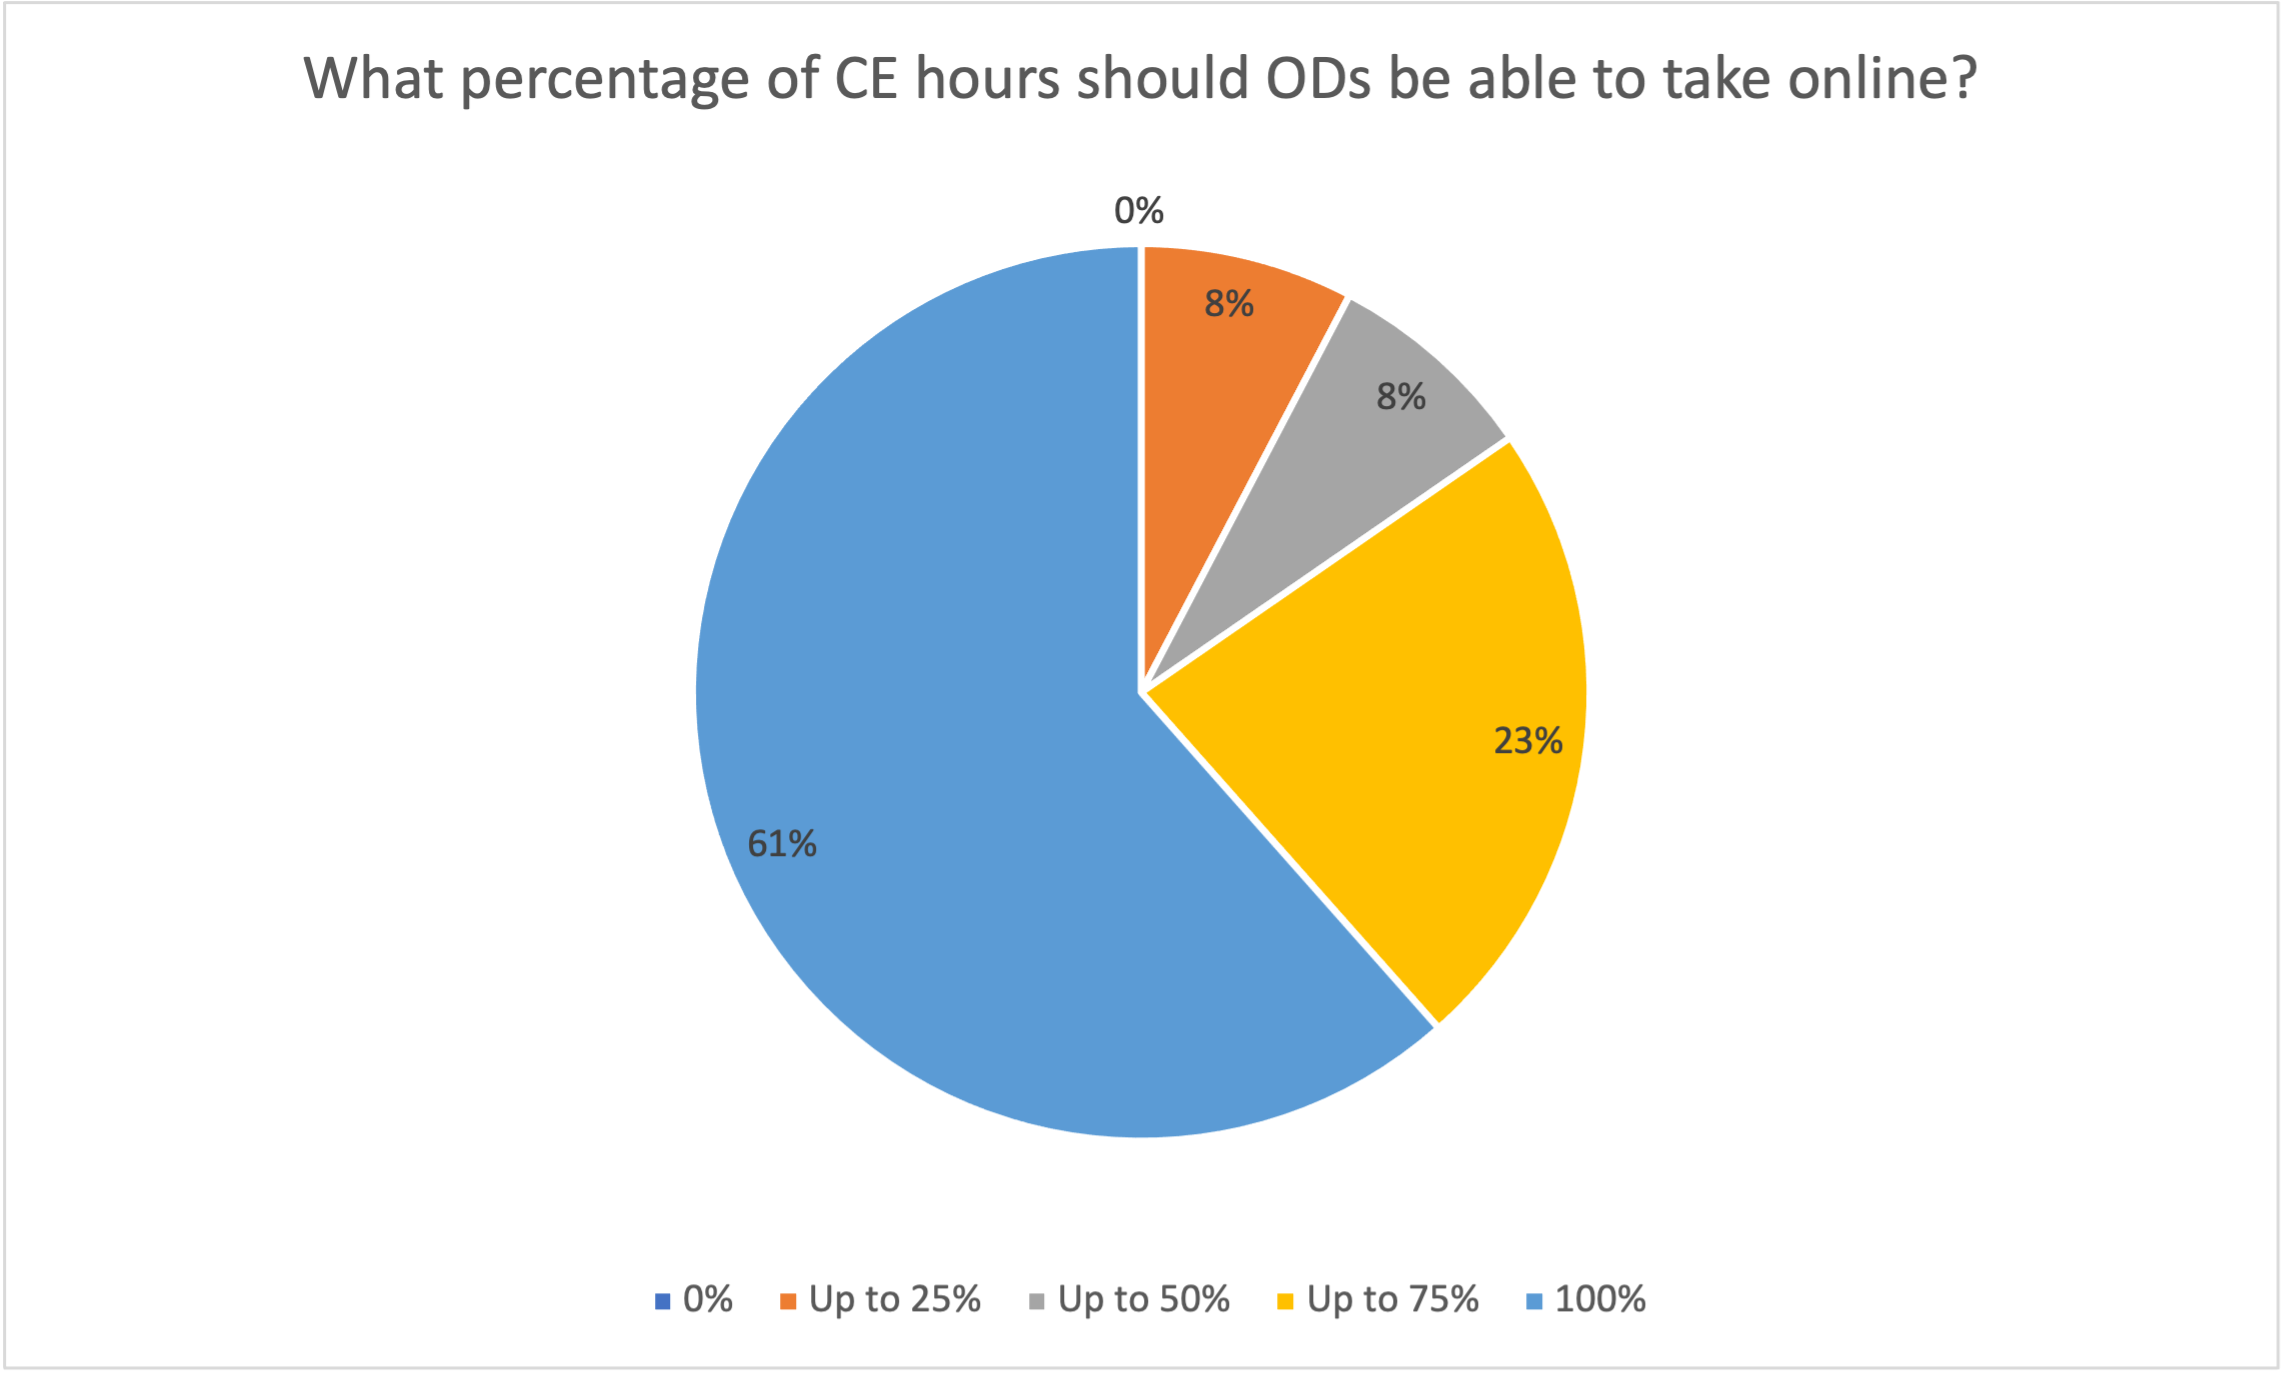 Poll results: What percentage of CE hours should ODs be able to take online?